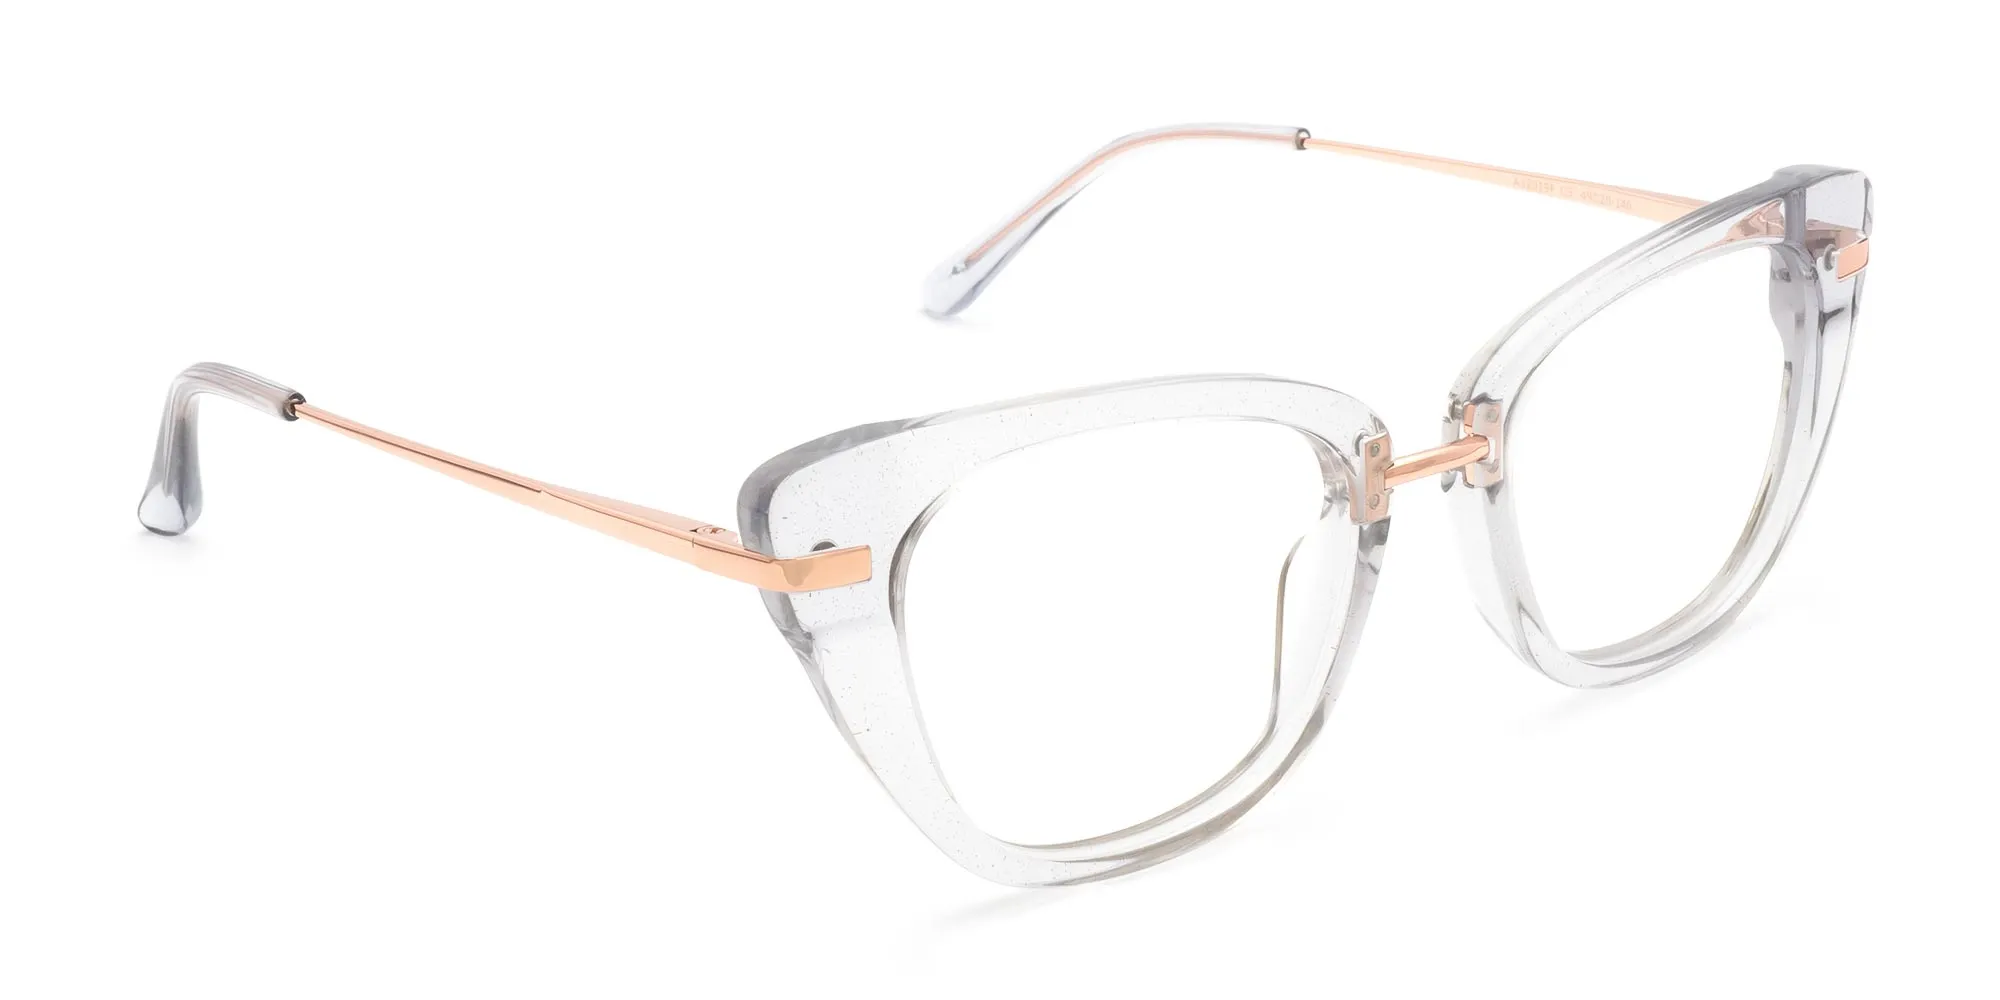 spectacles frames for ladies-2